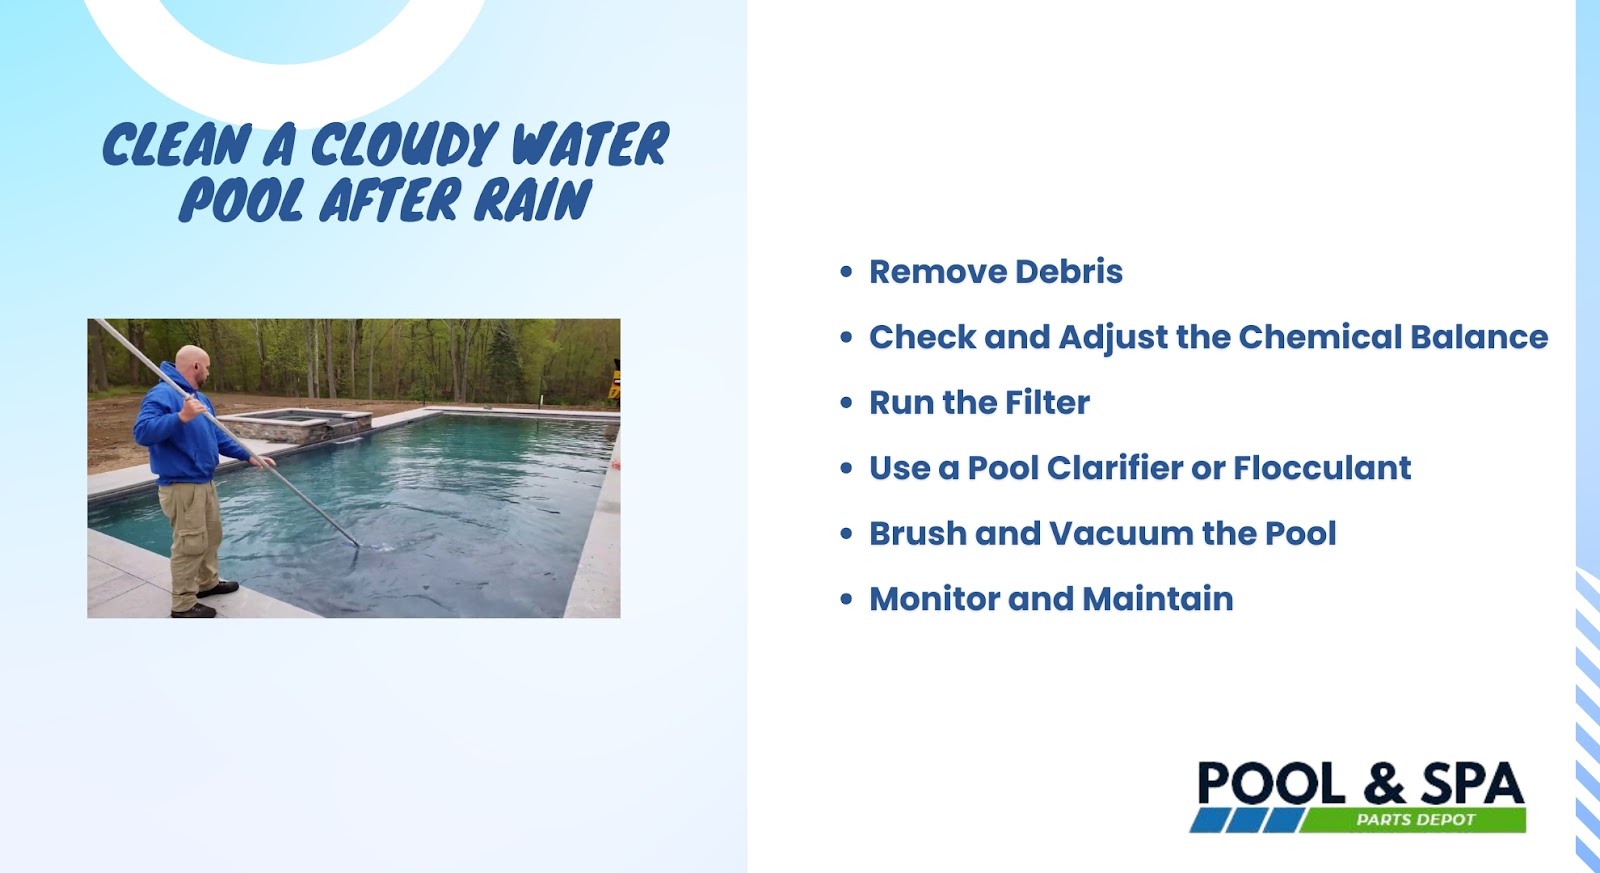 How to Clean a Cloudy Water Pool After Rain?